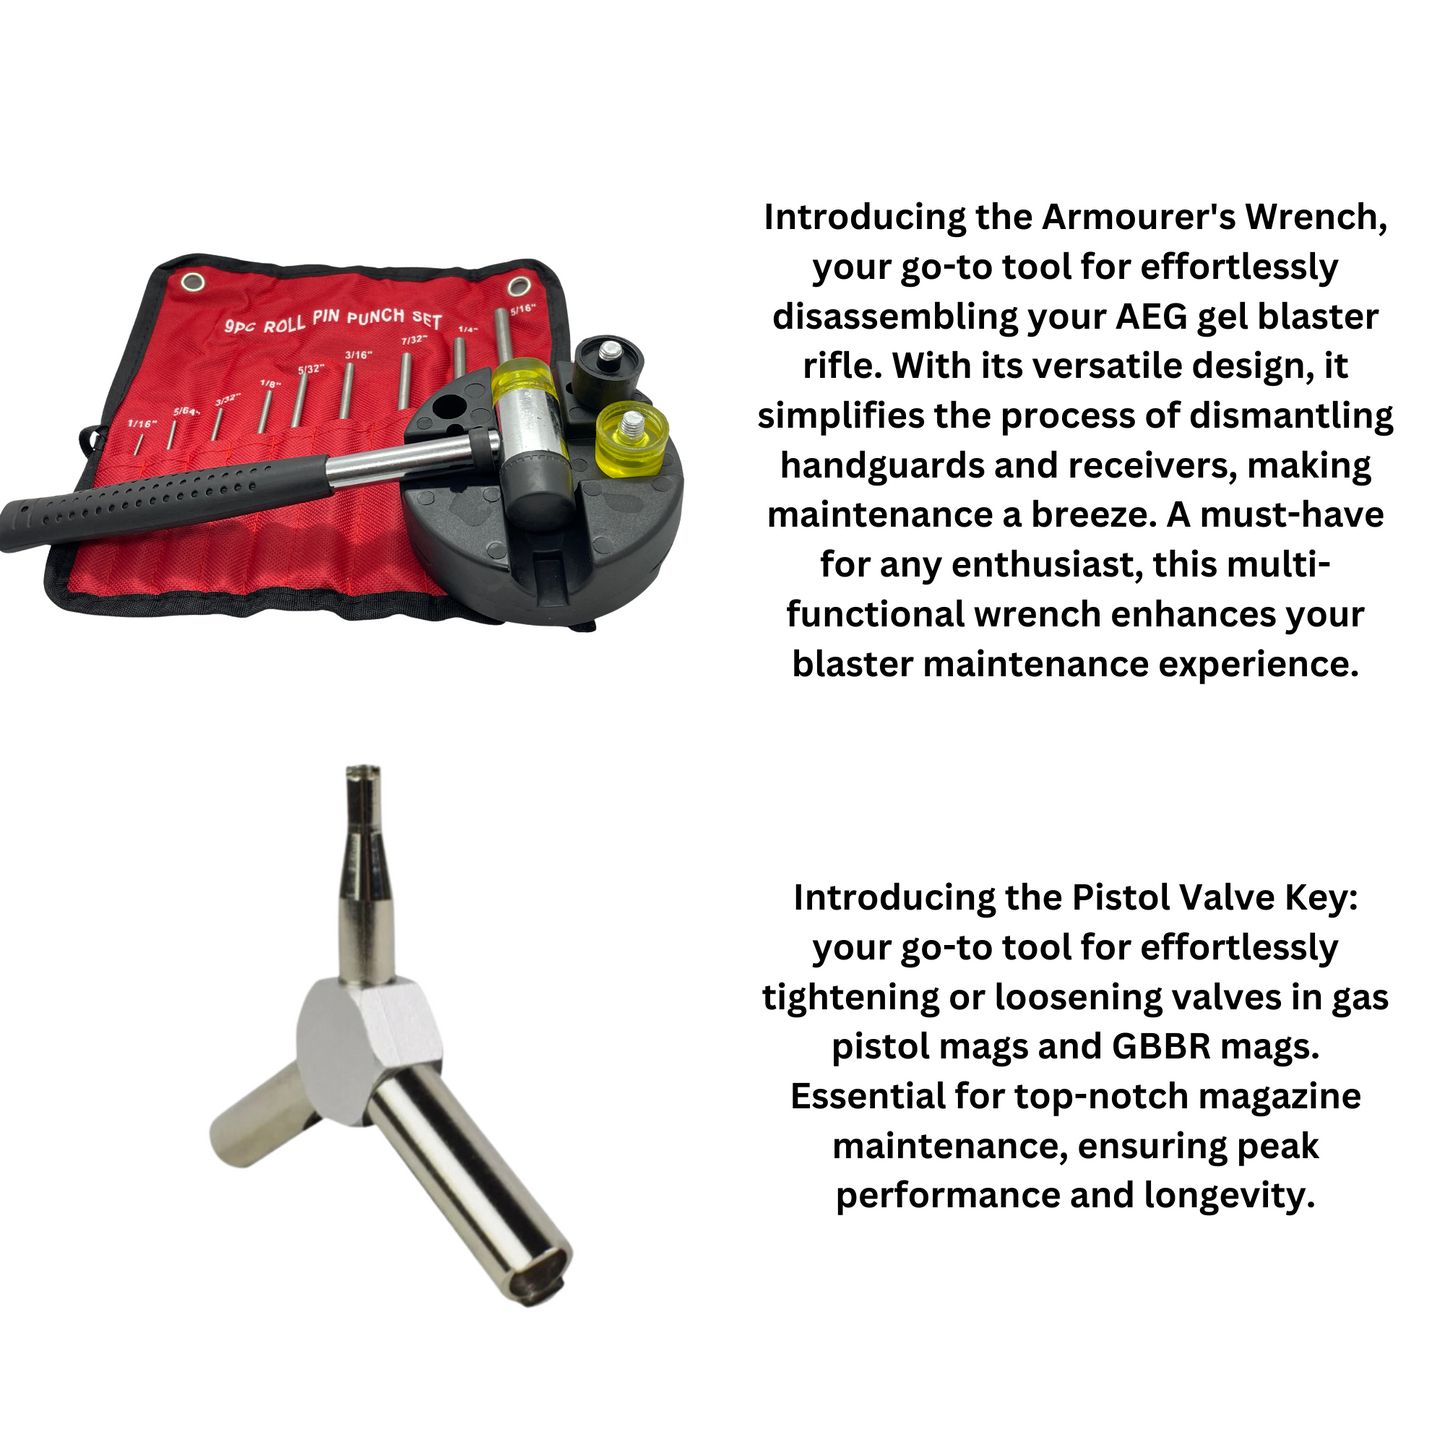 Pro All-In-One Maintenance Care Kit